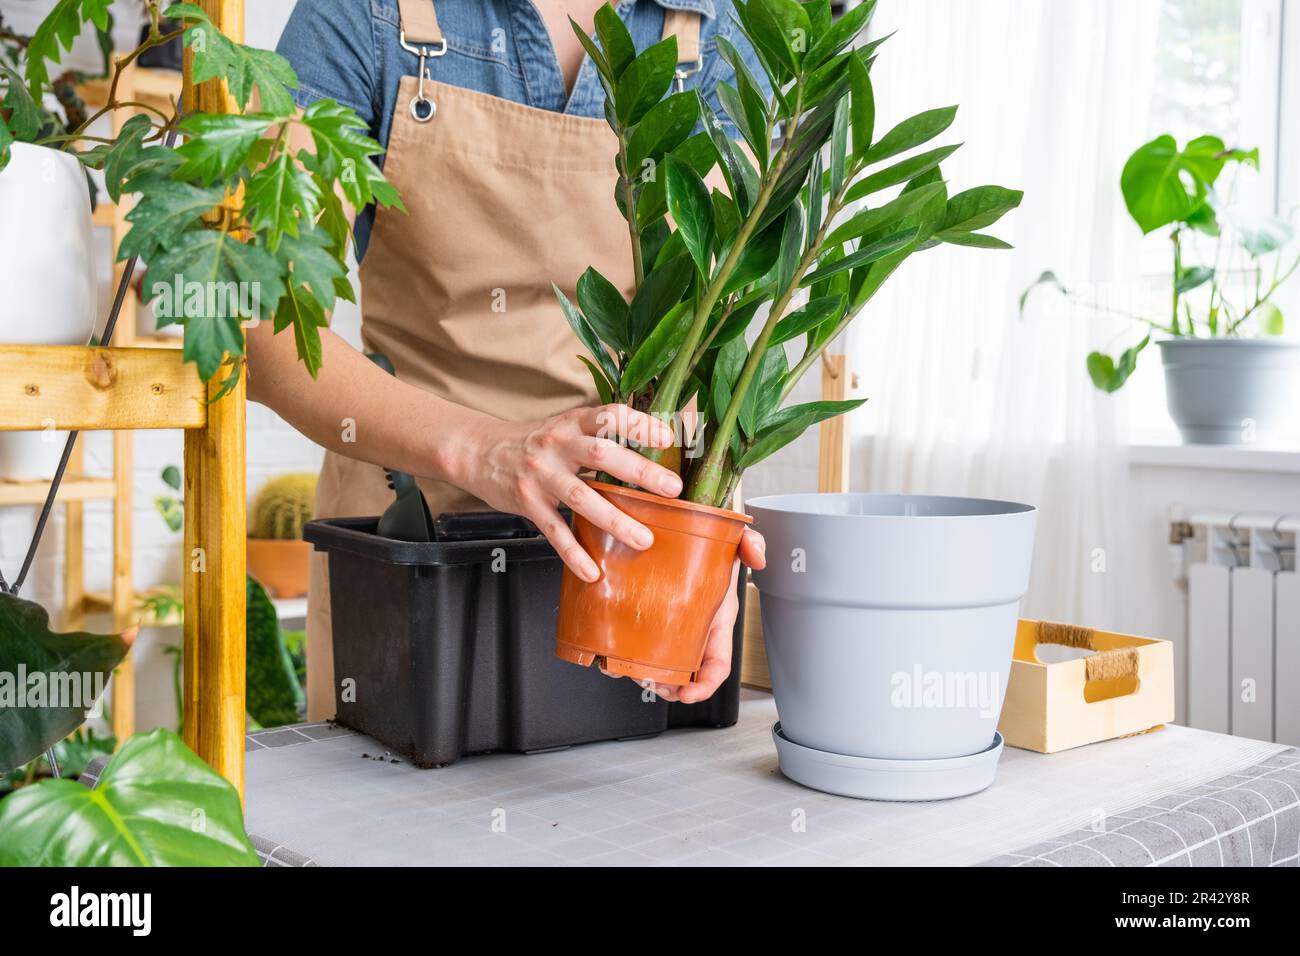 Repotting overgrown home plant succulent Zamioculcas  into new bigger pot. Caring for potted plant, hands of woman in apron, mock up Stock Photo